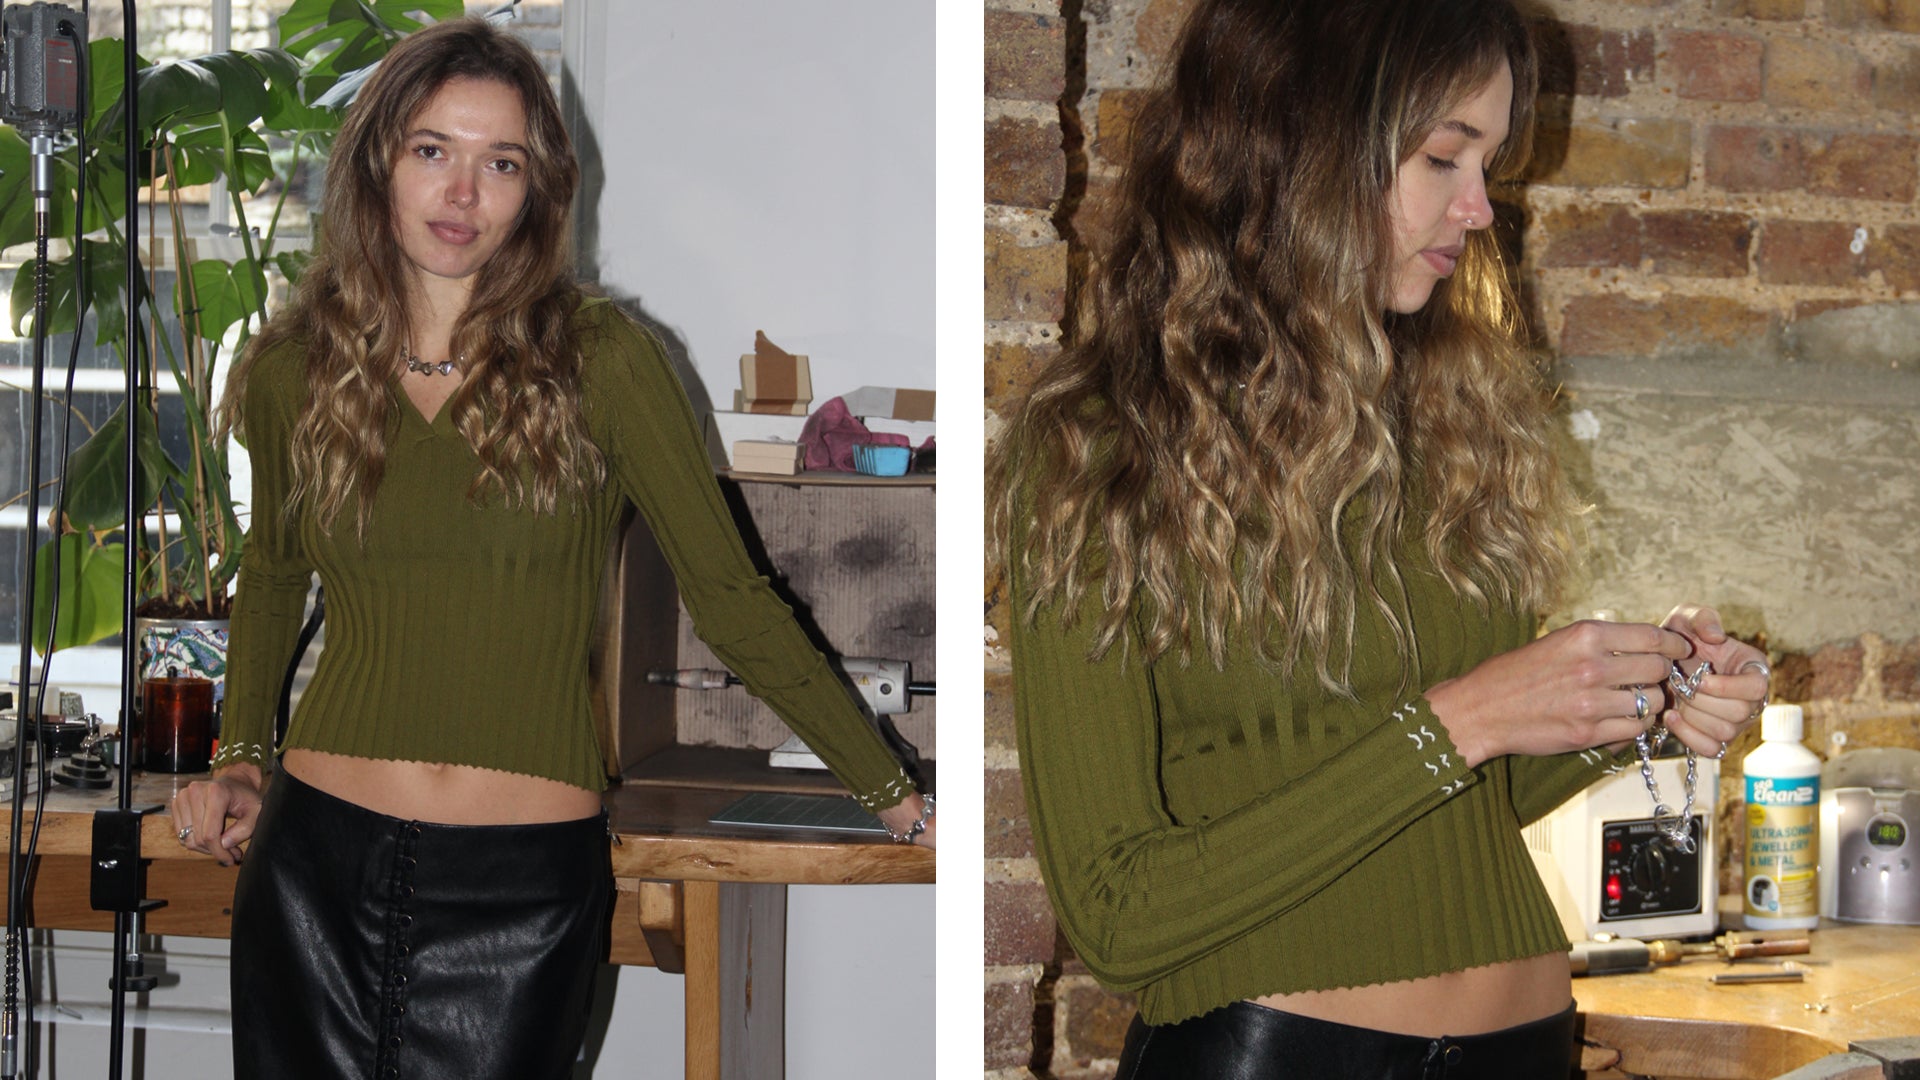 woman wearing an olive merino wool top and a vegan leather skirt